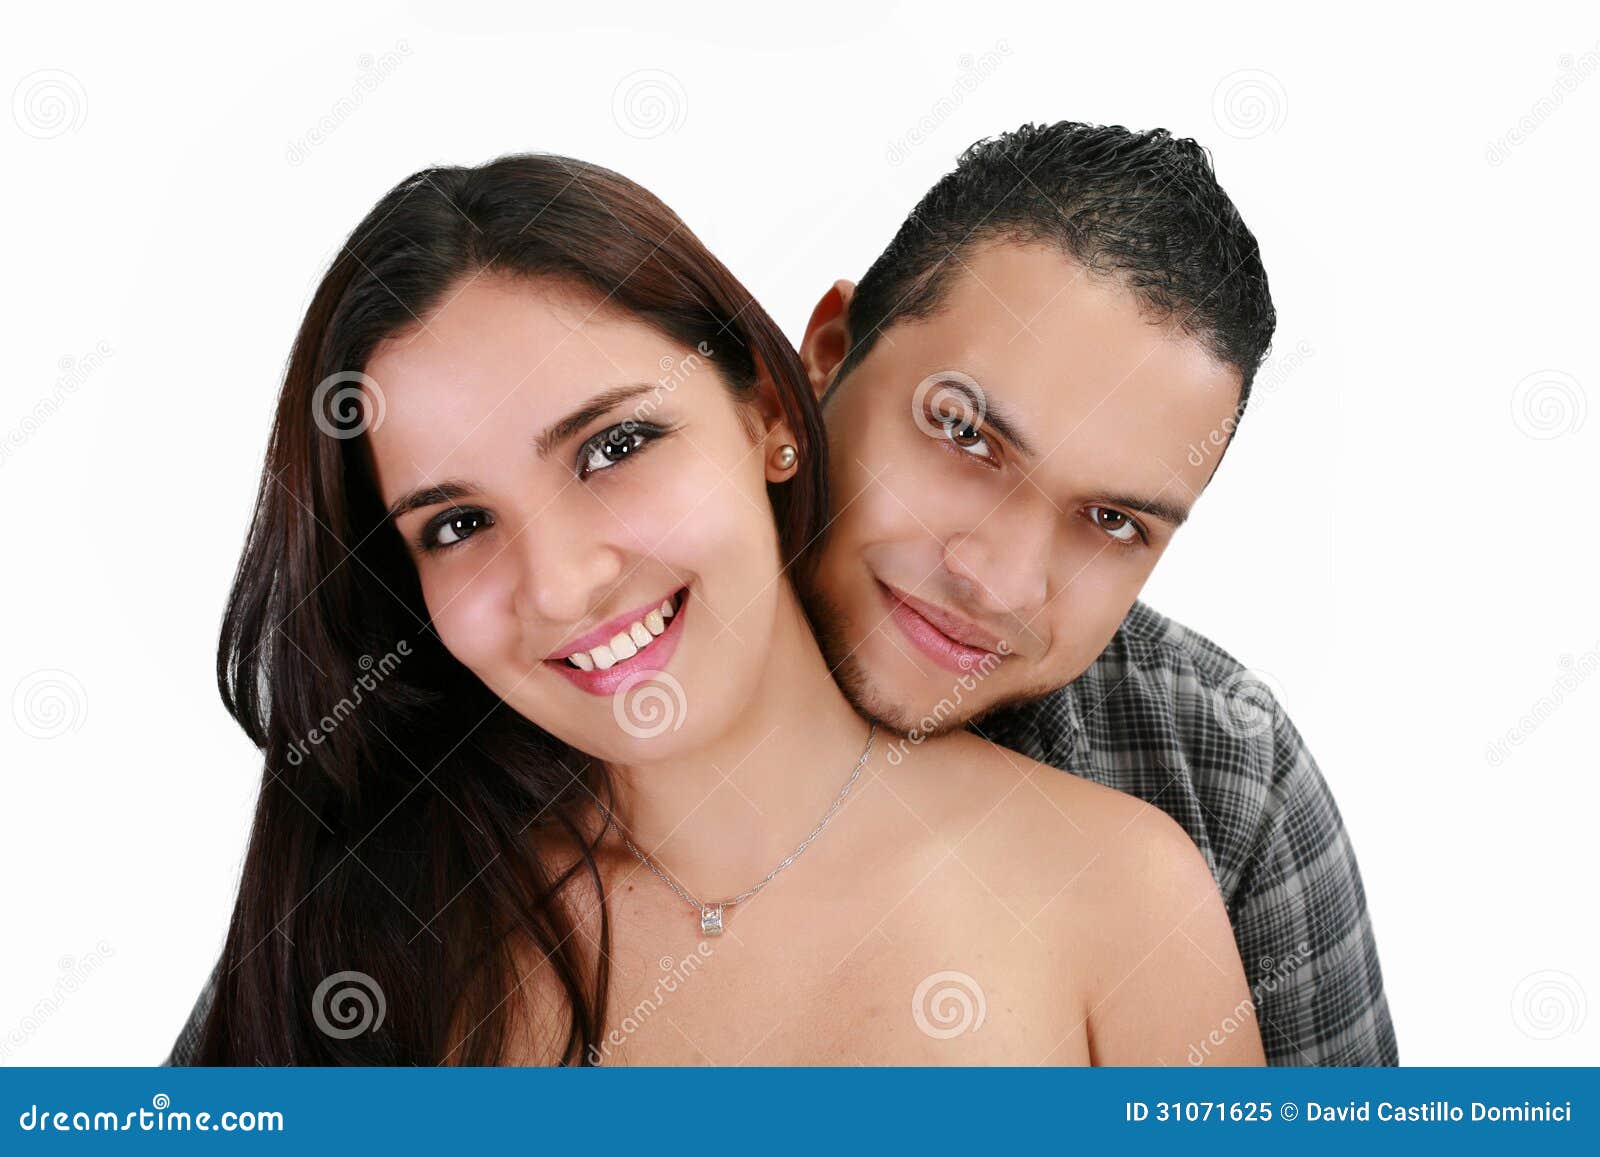 https://thumbs.dreamstime.com/z/happy-smiling-young-latin-couple-isolated-white-background-31071625.jpg